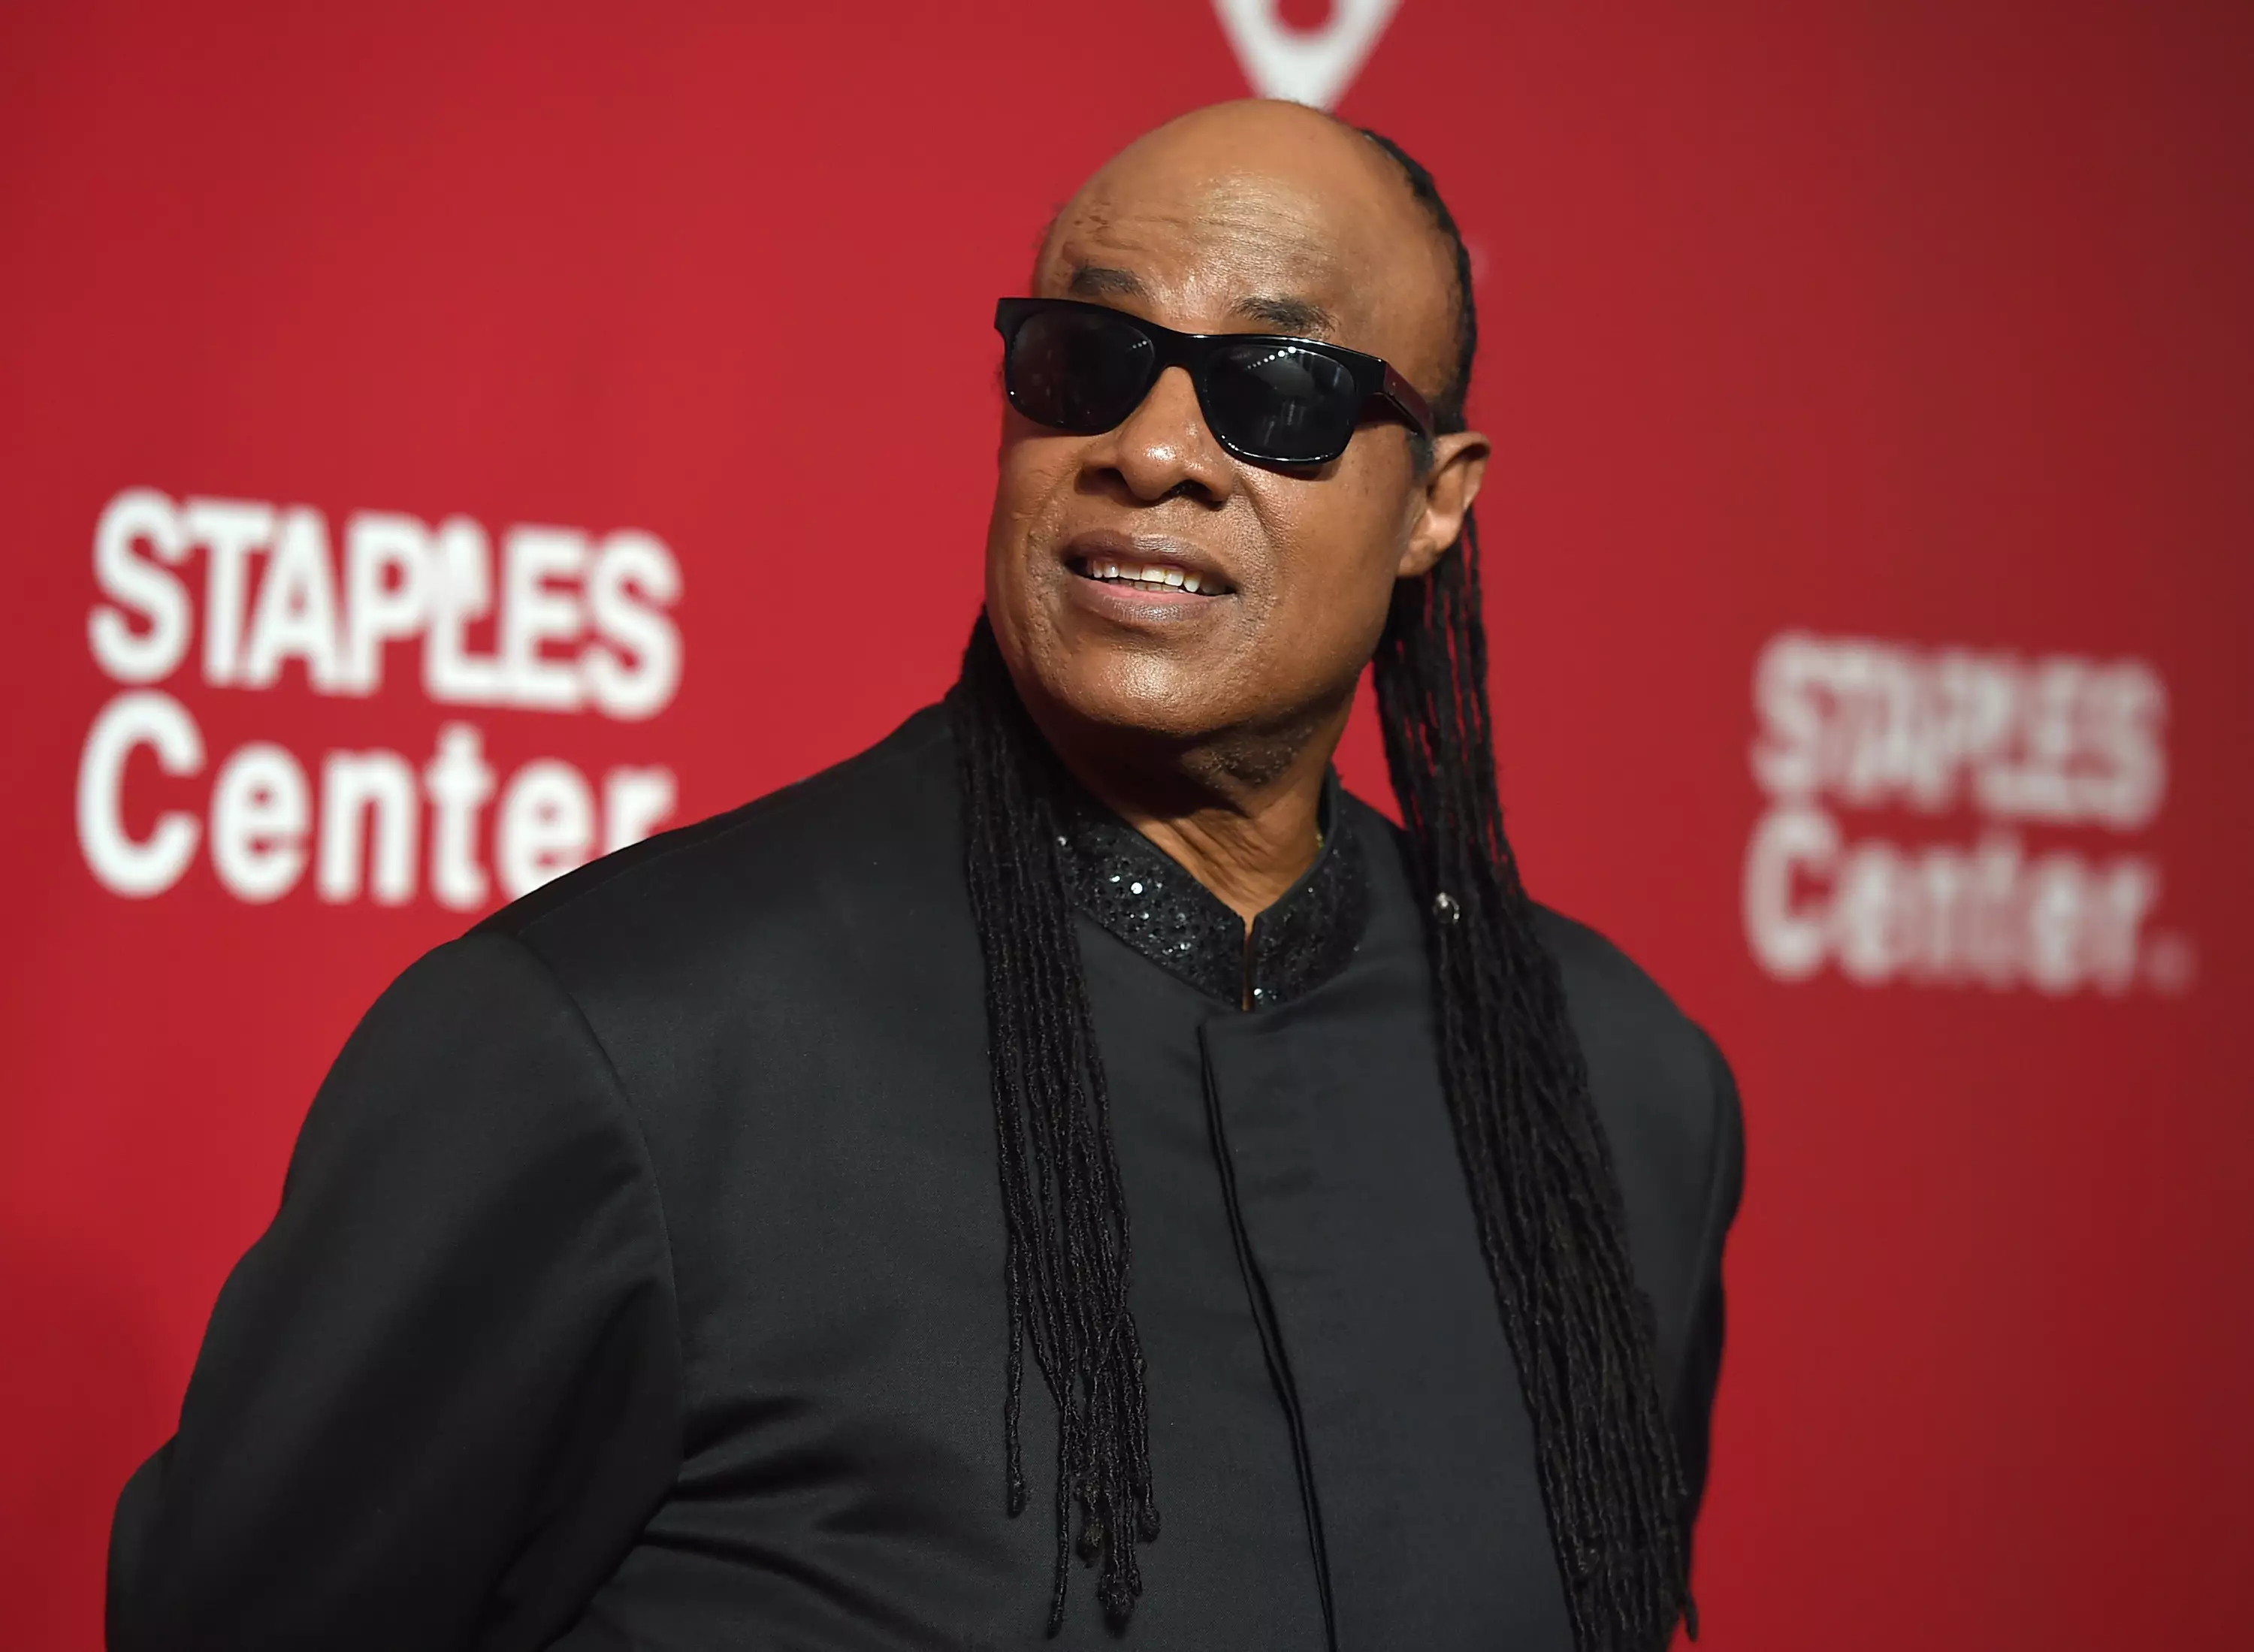 Stevie Wonder Just Had Donald Trump For Breakfast, Lunch And Dinner